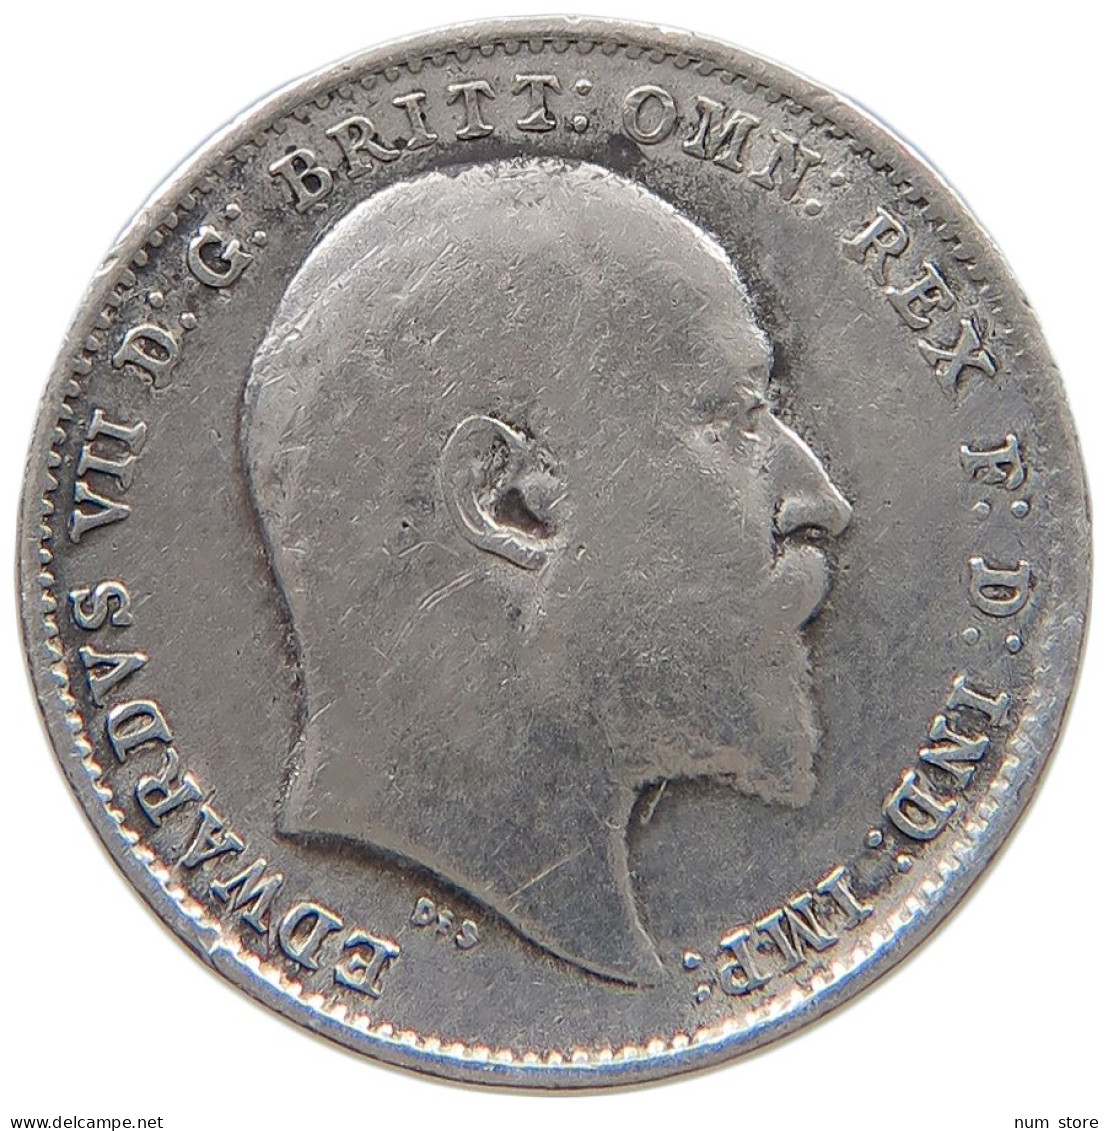 GREAT BRITAIN THREEPENCE 1903 Edward VII., 1901 - 1910 #a052 0465 - F. 3 Pence